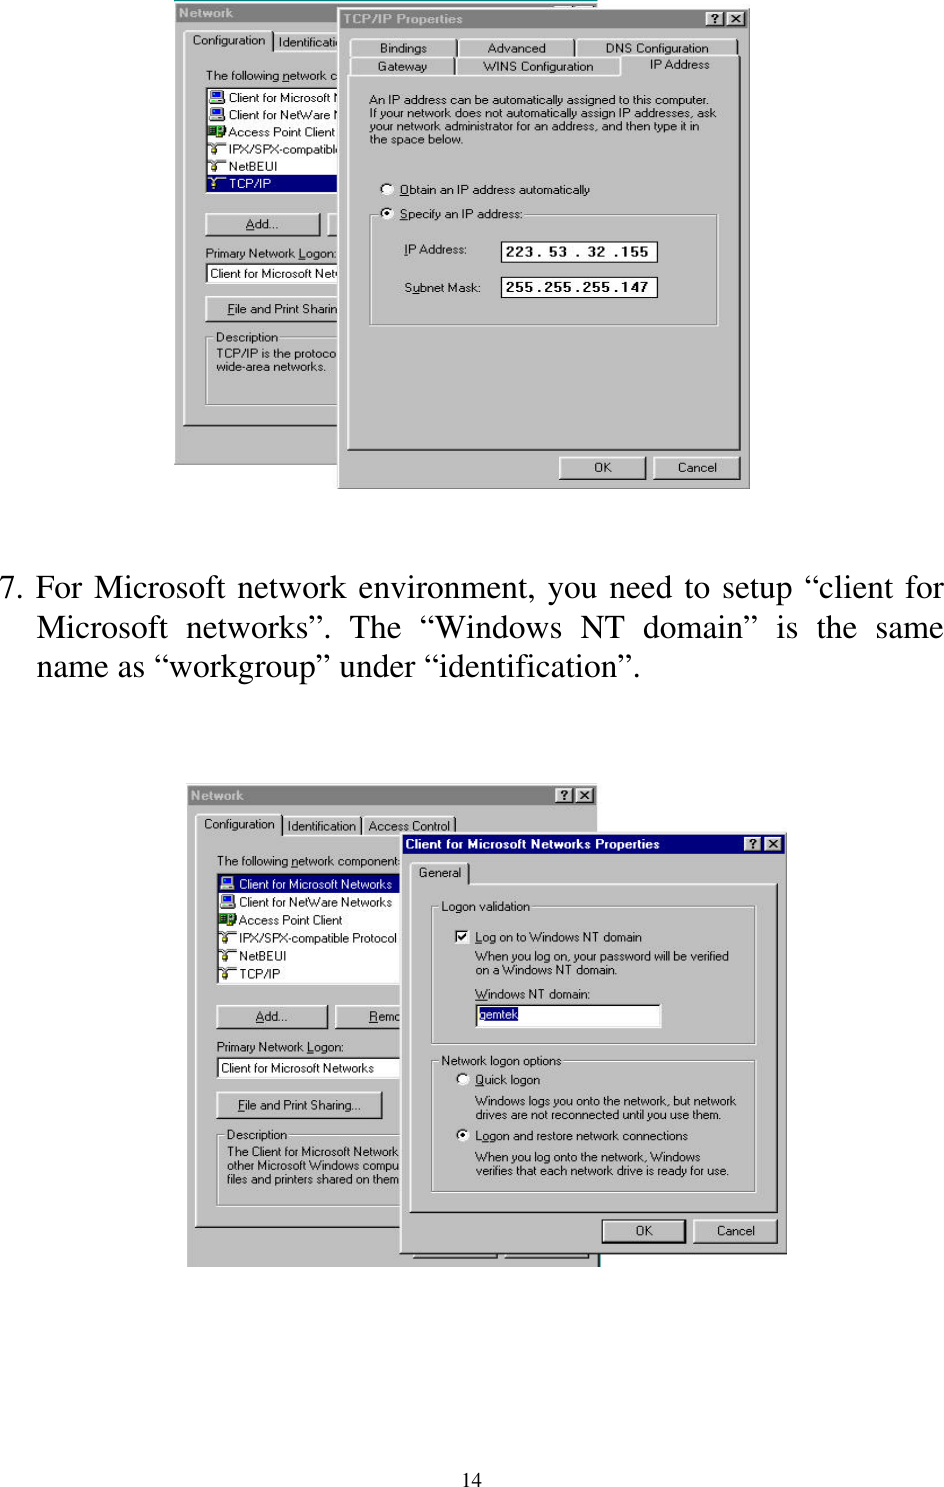 147. For Microsoft network environment, you need to setup “client forMicrosoft networks”. The “Windows NT domain” is the samename as “workgroup” under “identification”.